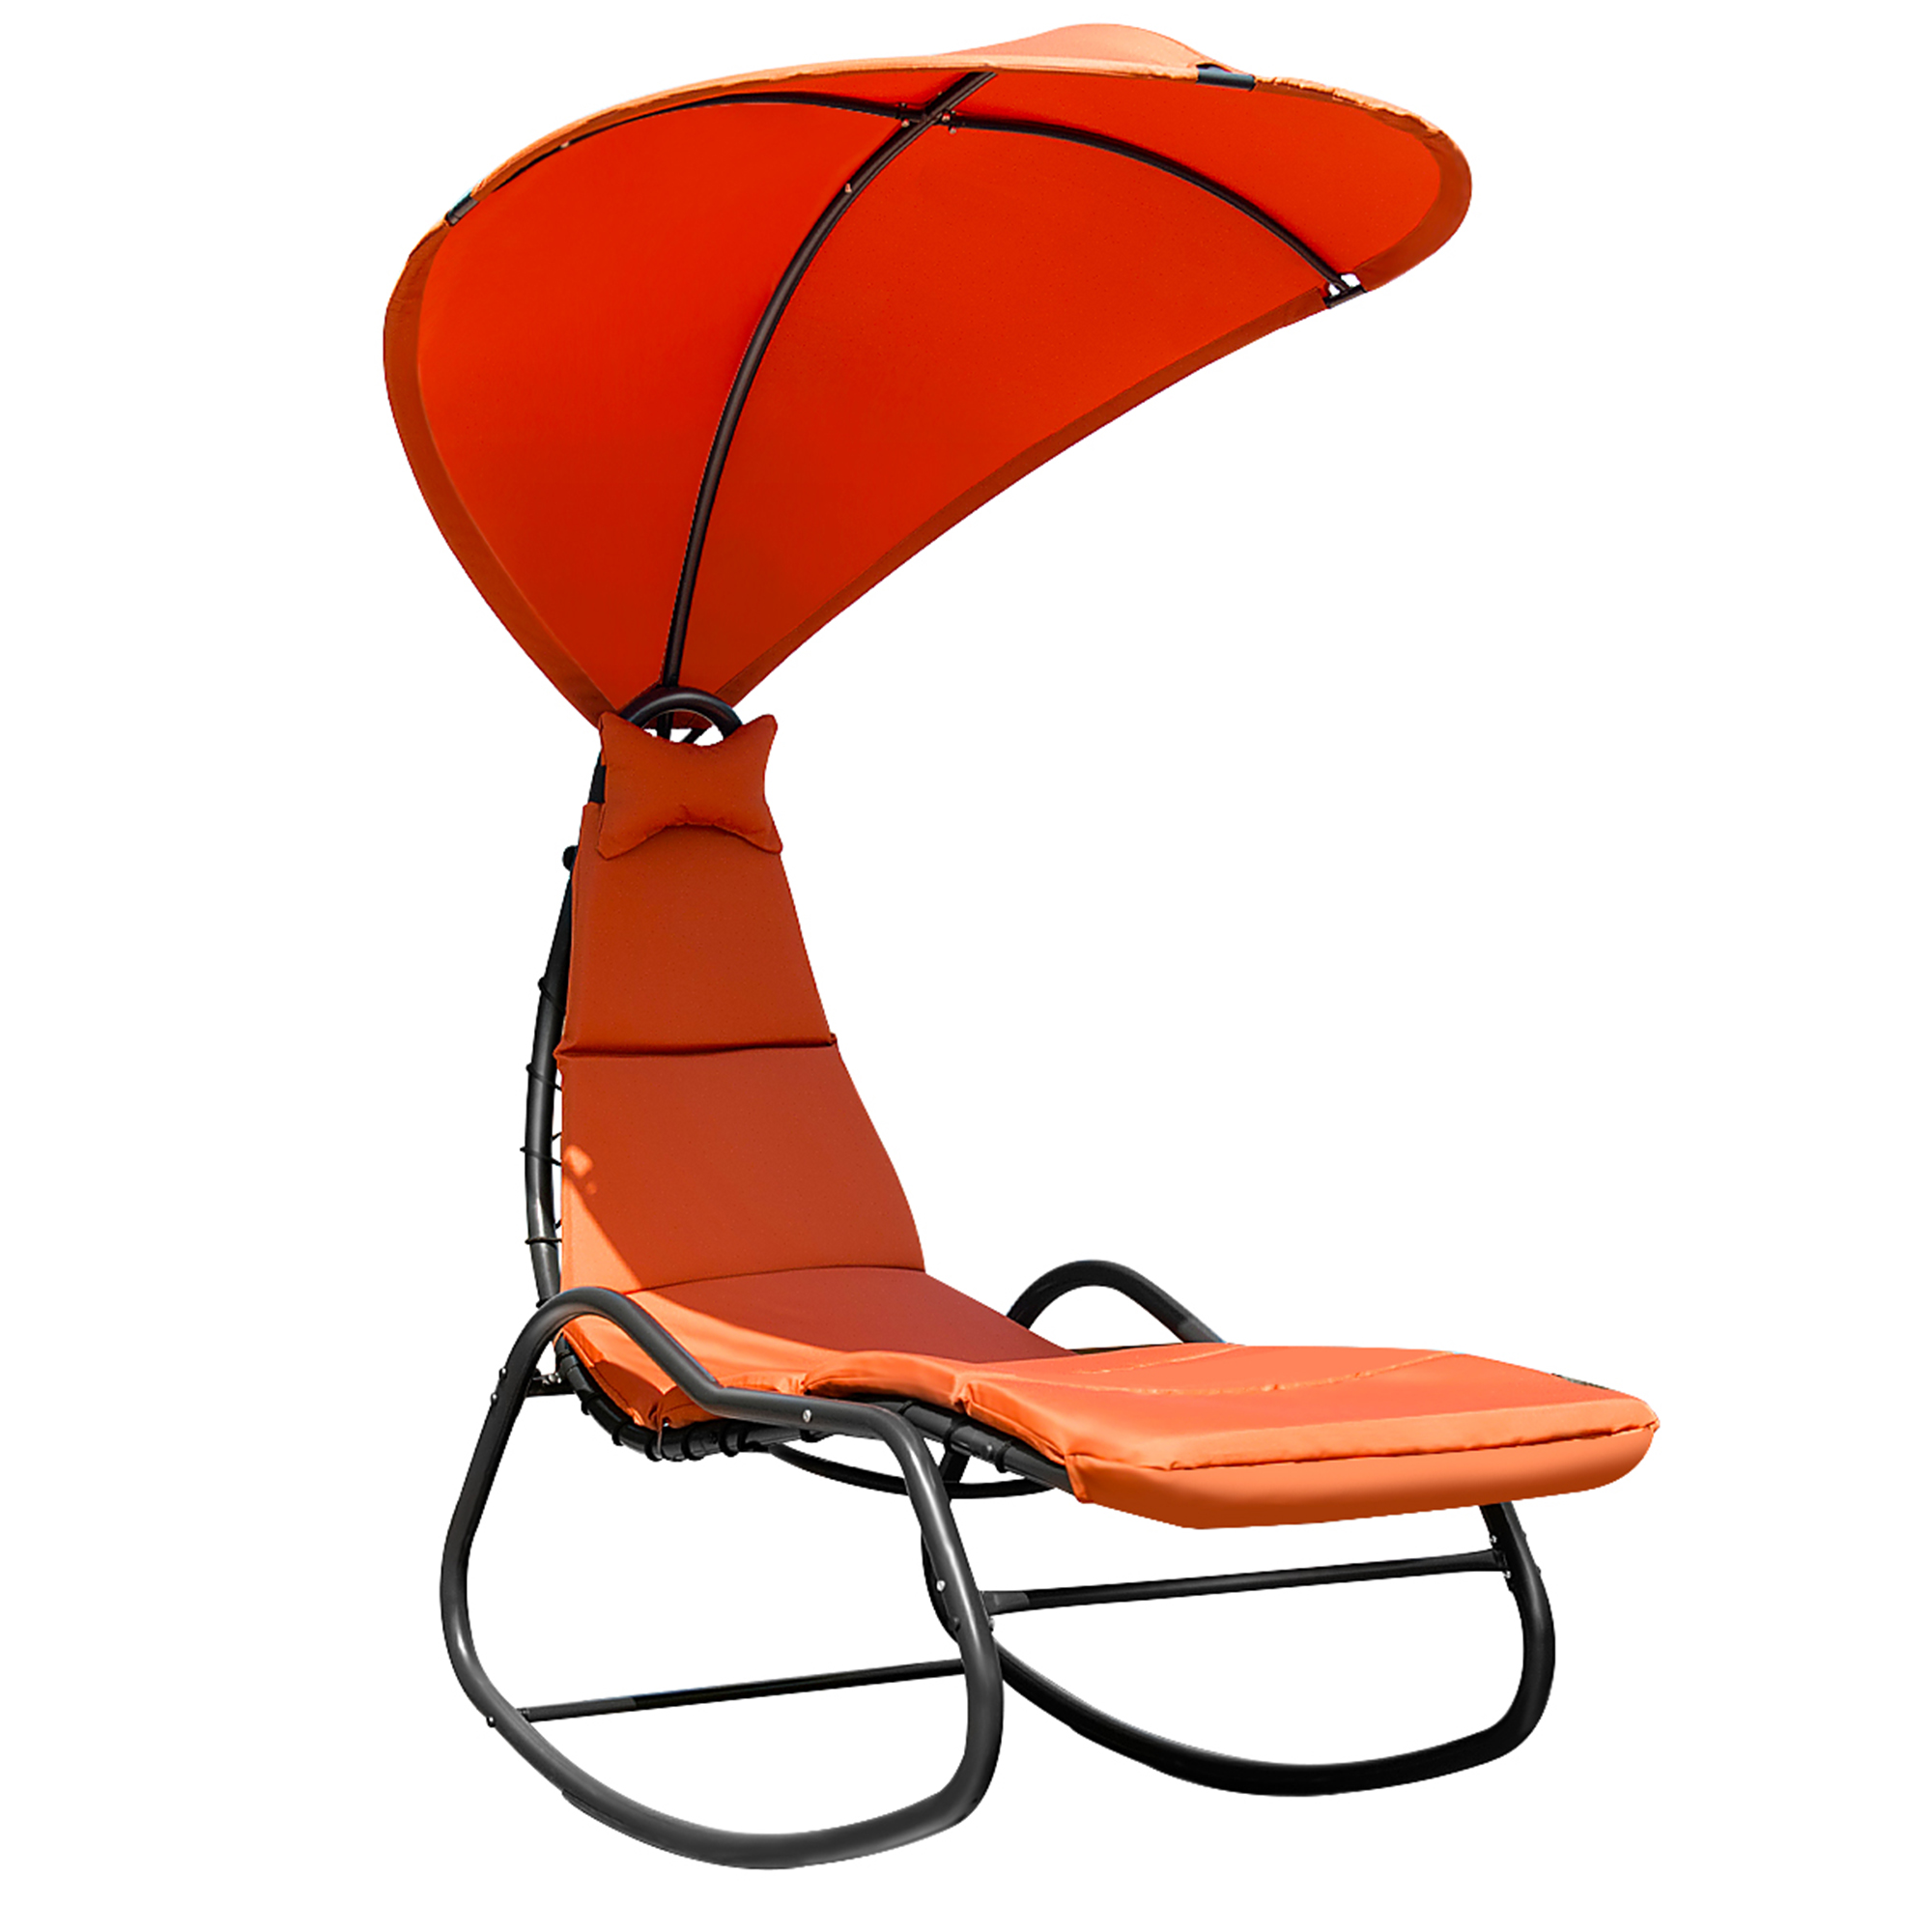 Gymax Patio Lounge Chair Chaise Garden w/ Steel Frame Cushion Canopy Orange - image 5 of 10